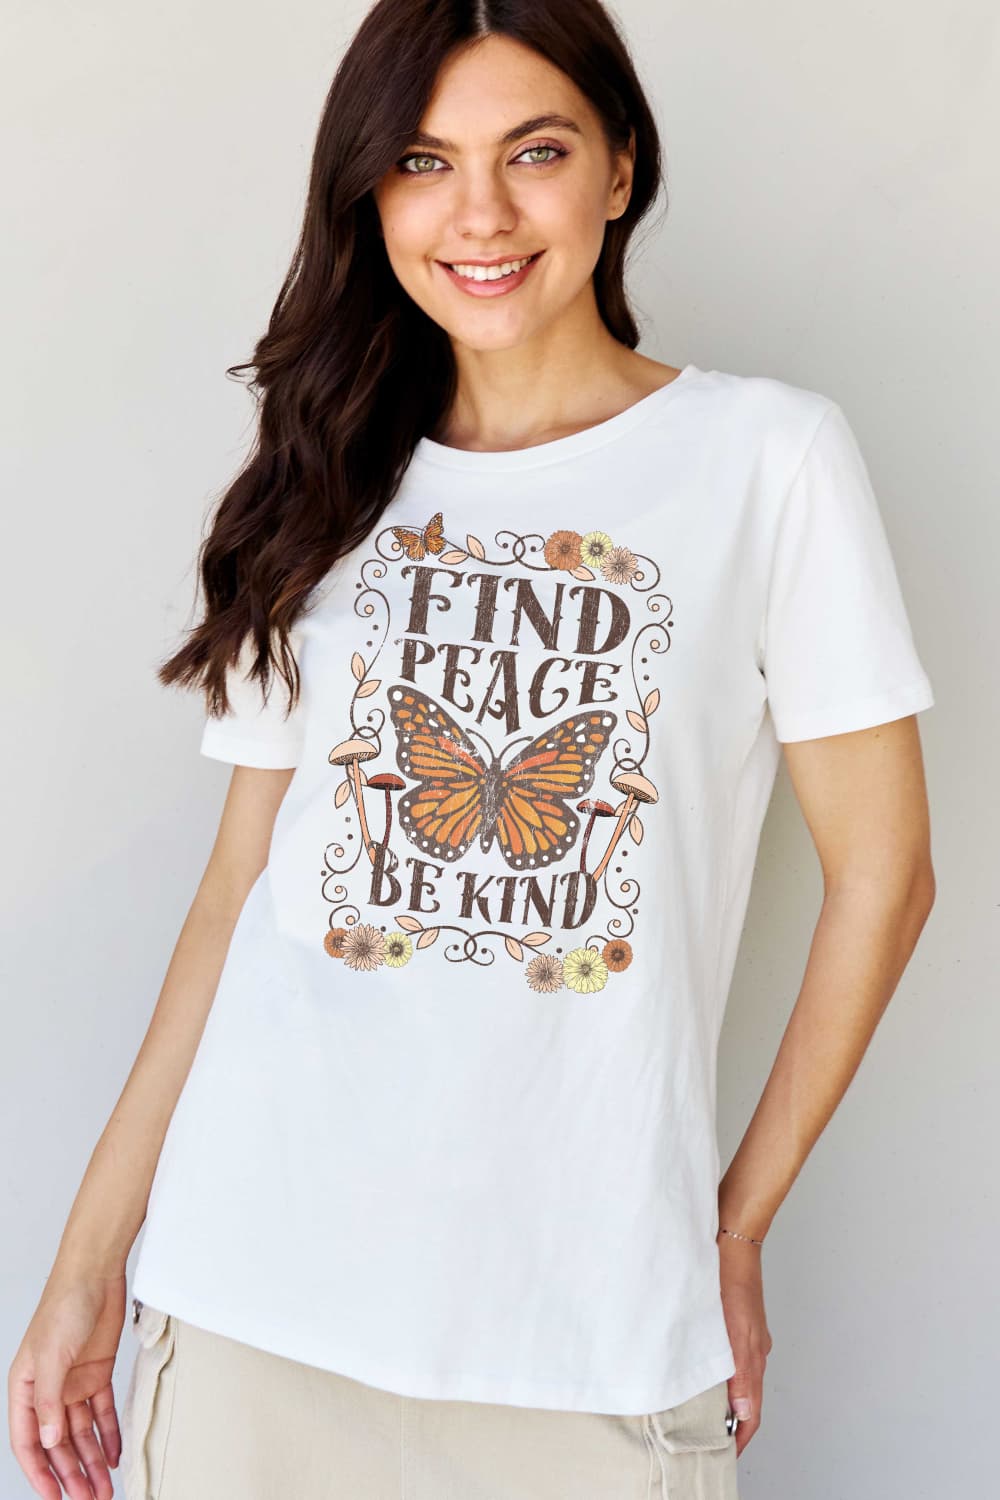 Light Gray Simply Love Full Size FIND PEACE BE KIND Graphic Cotton T-Shirt Graphic Tees